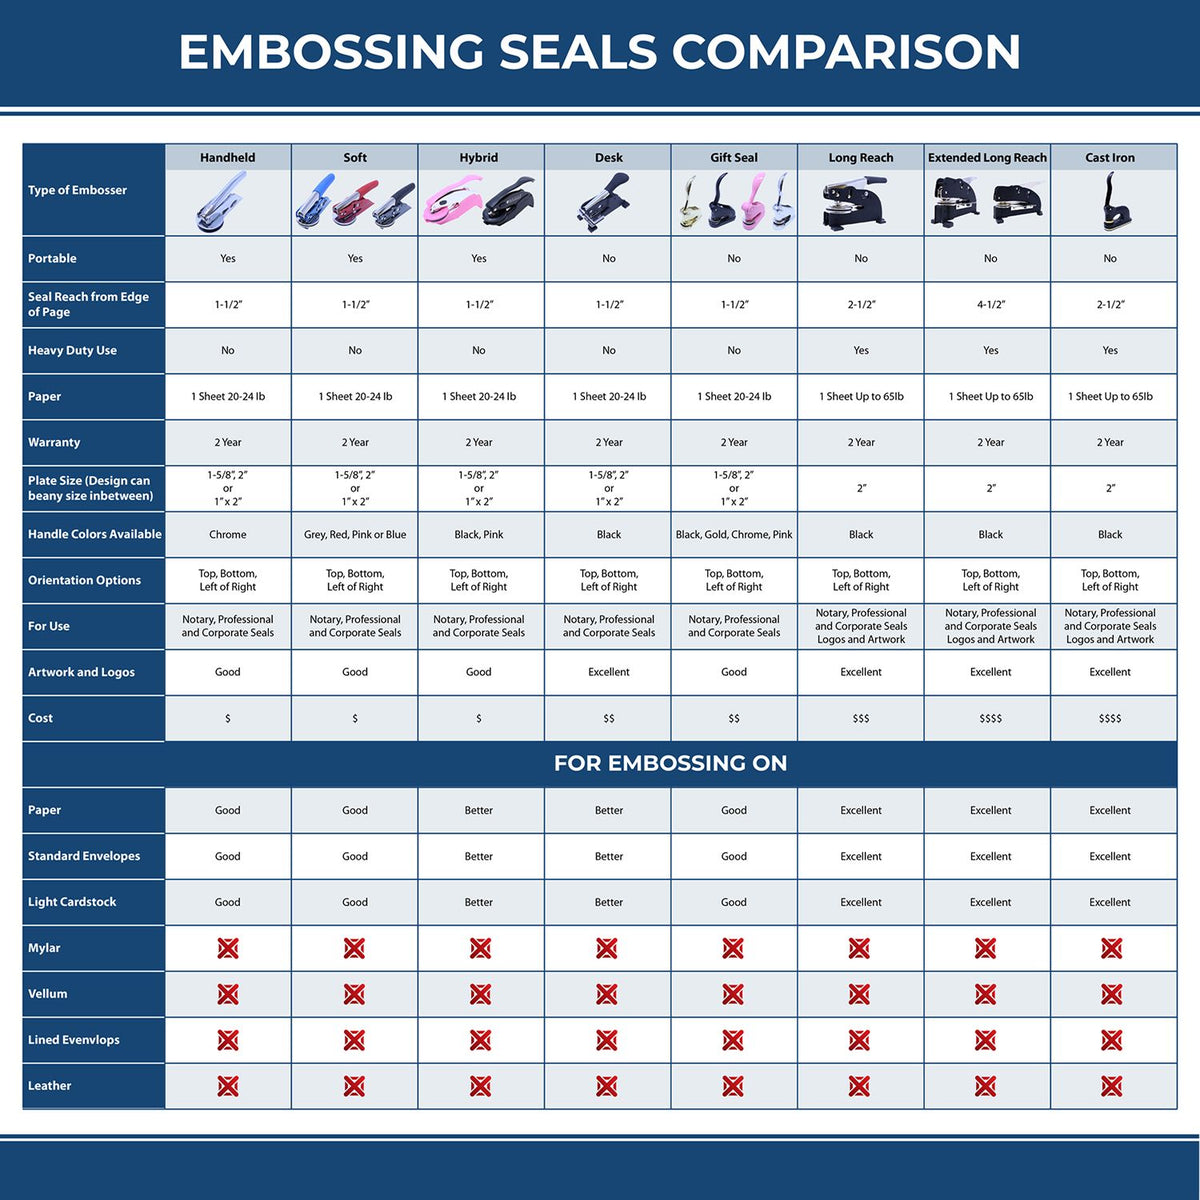 A comparison chart for the different types of mount models available for the Handheld Tennessee Professional Engineer Embosser.